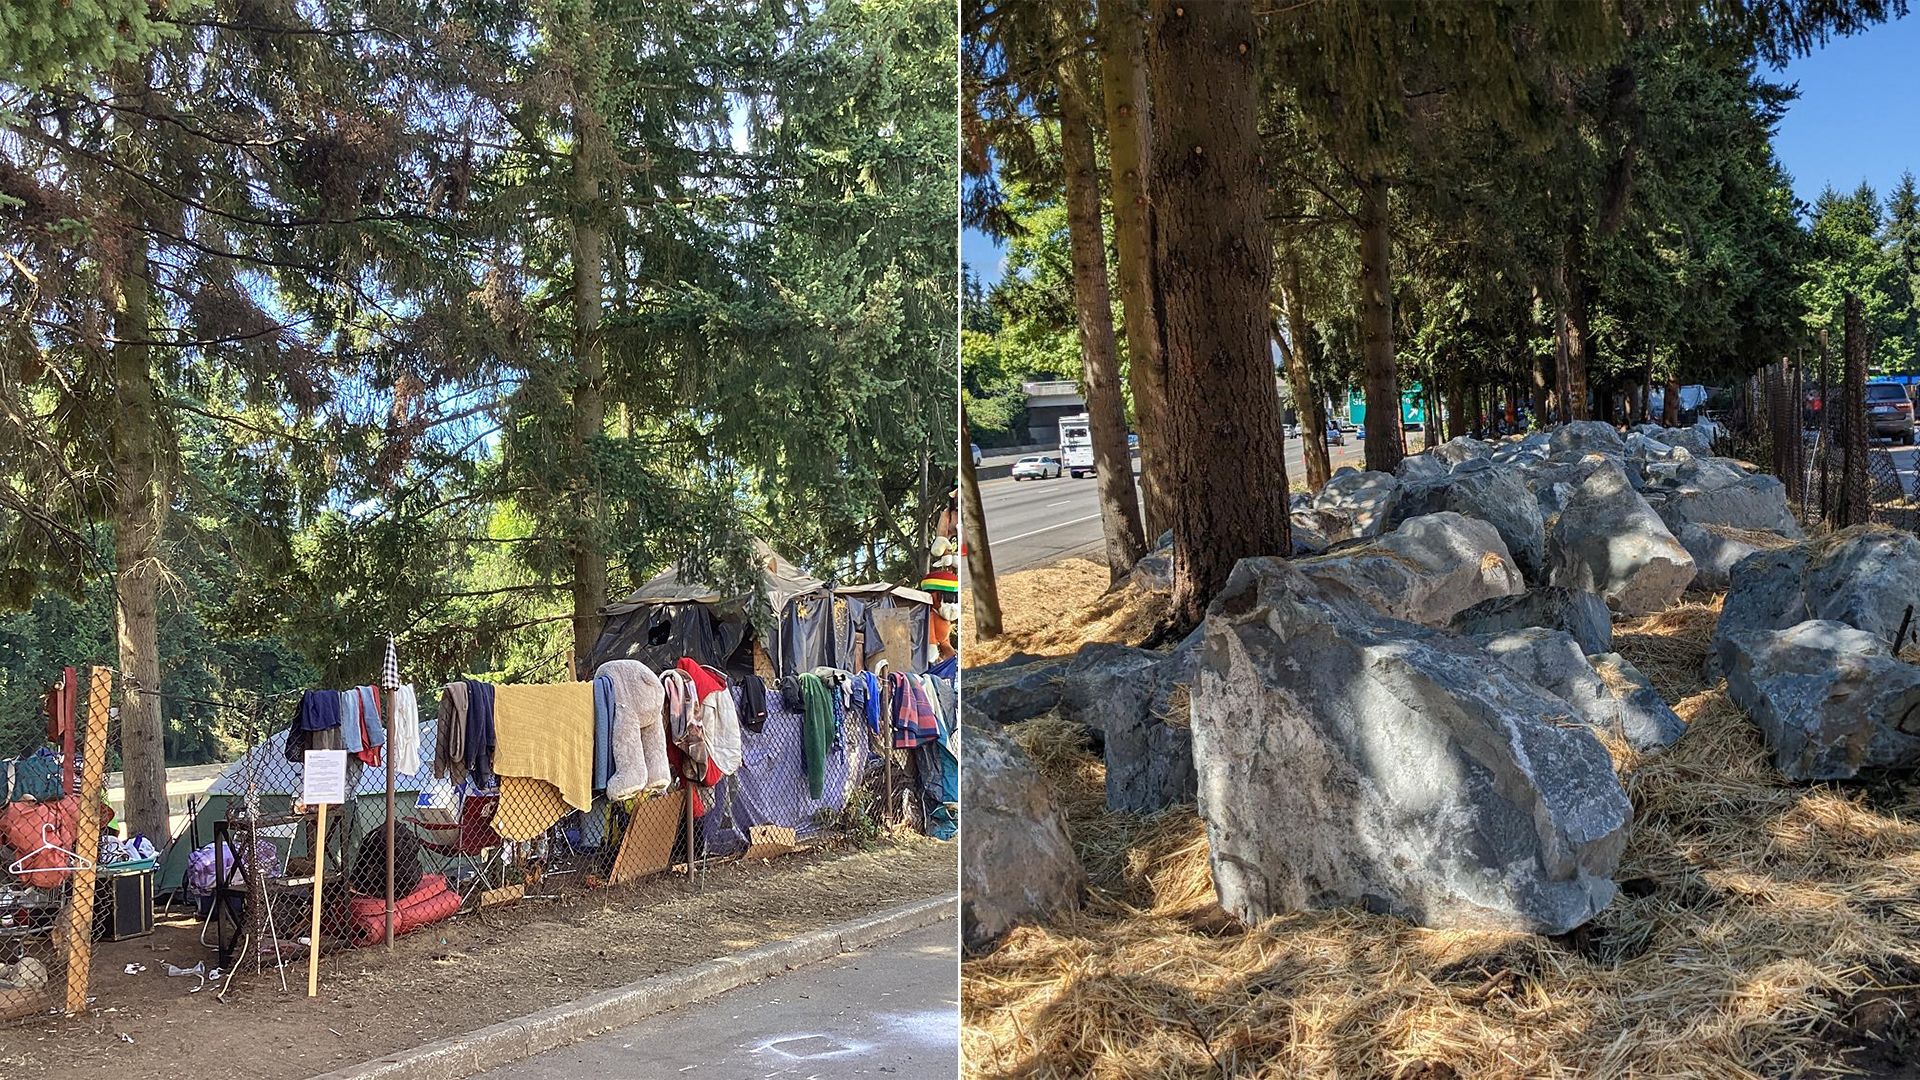 A splitscreen image showing an encampment near a freeway at left and the same encampment replaced with boulders at right.